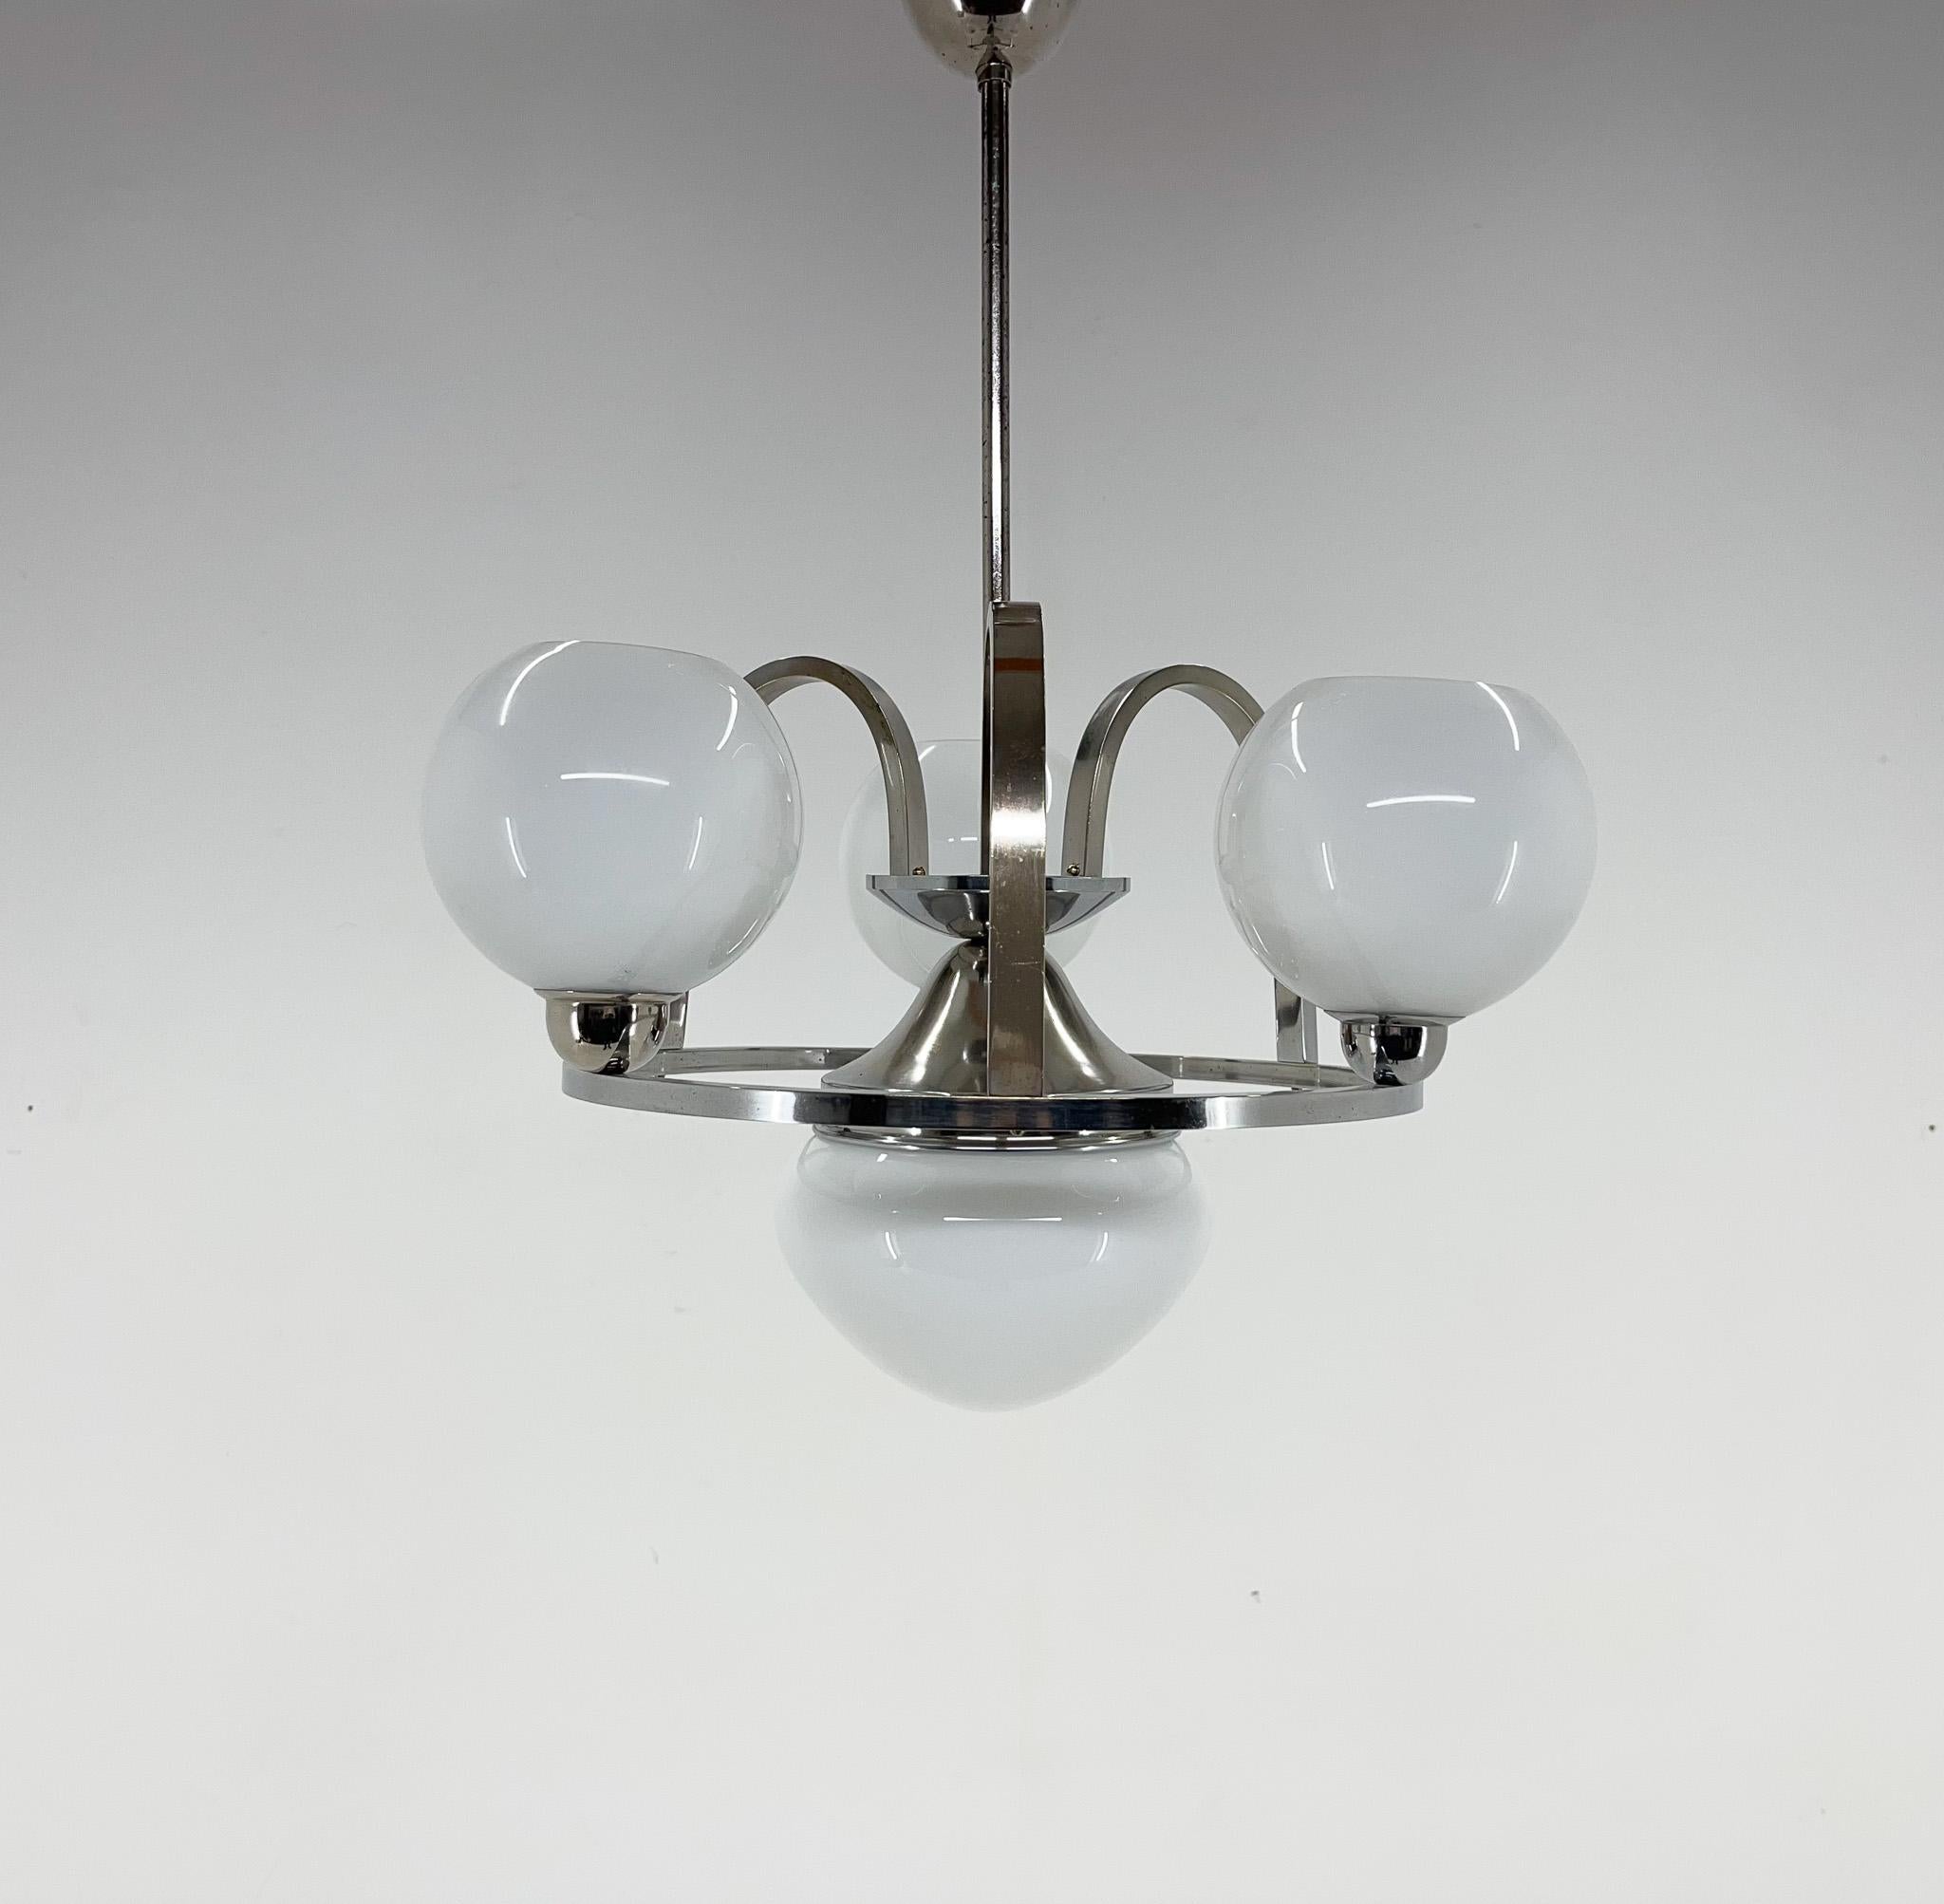 Beautiful art deco chrome chandelier made in the 1930's. Fully restored.